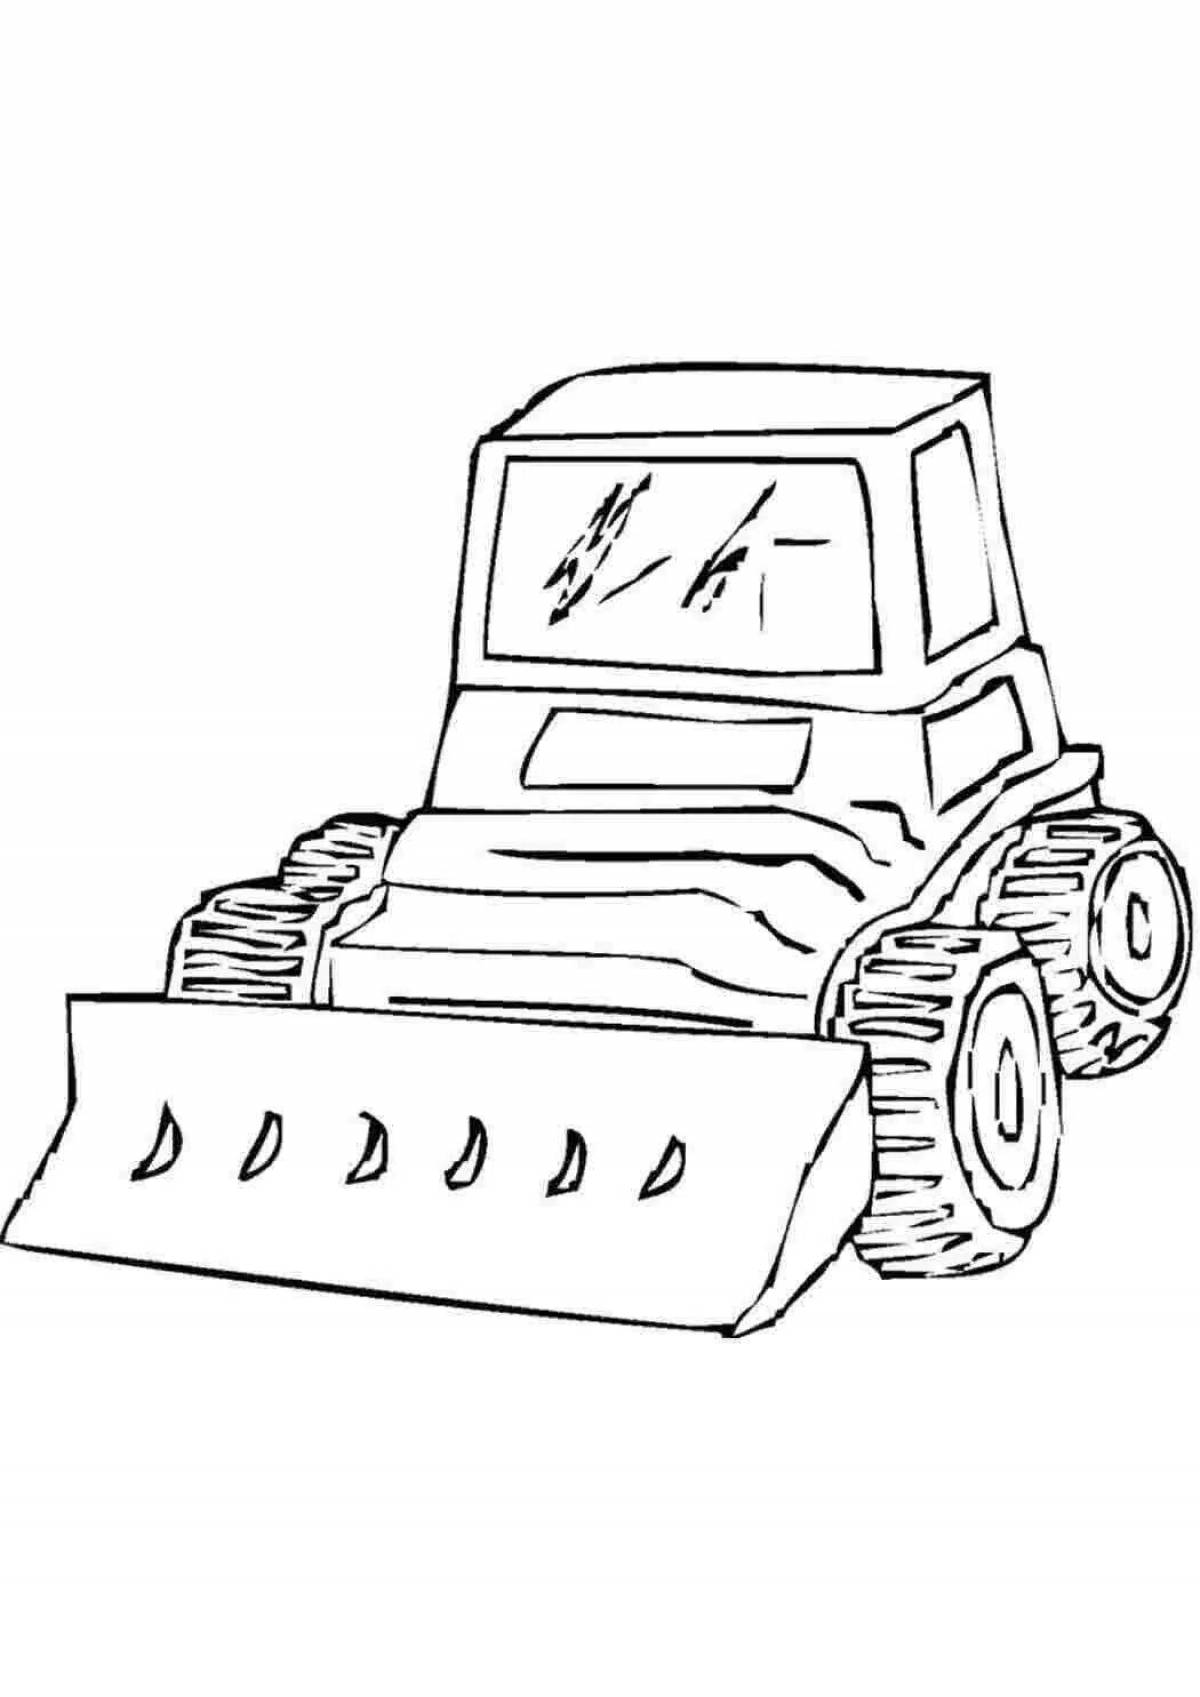 Exquisite snow blower coloring book for kids